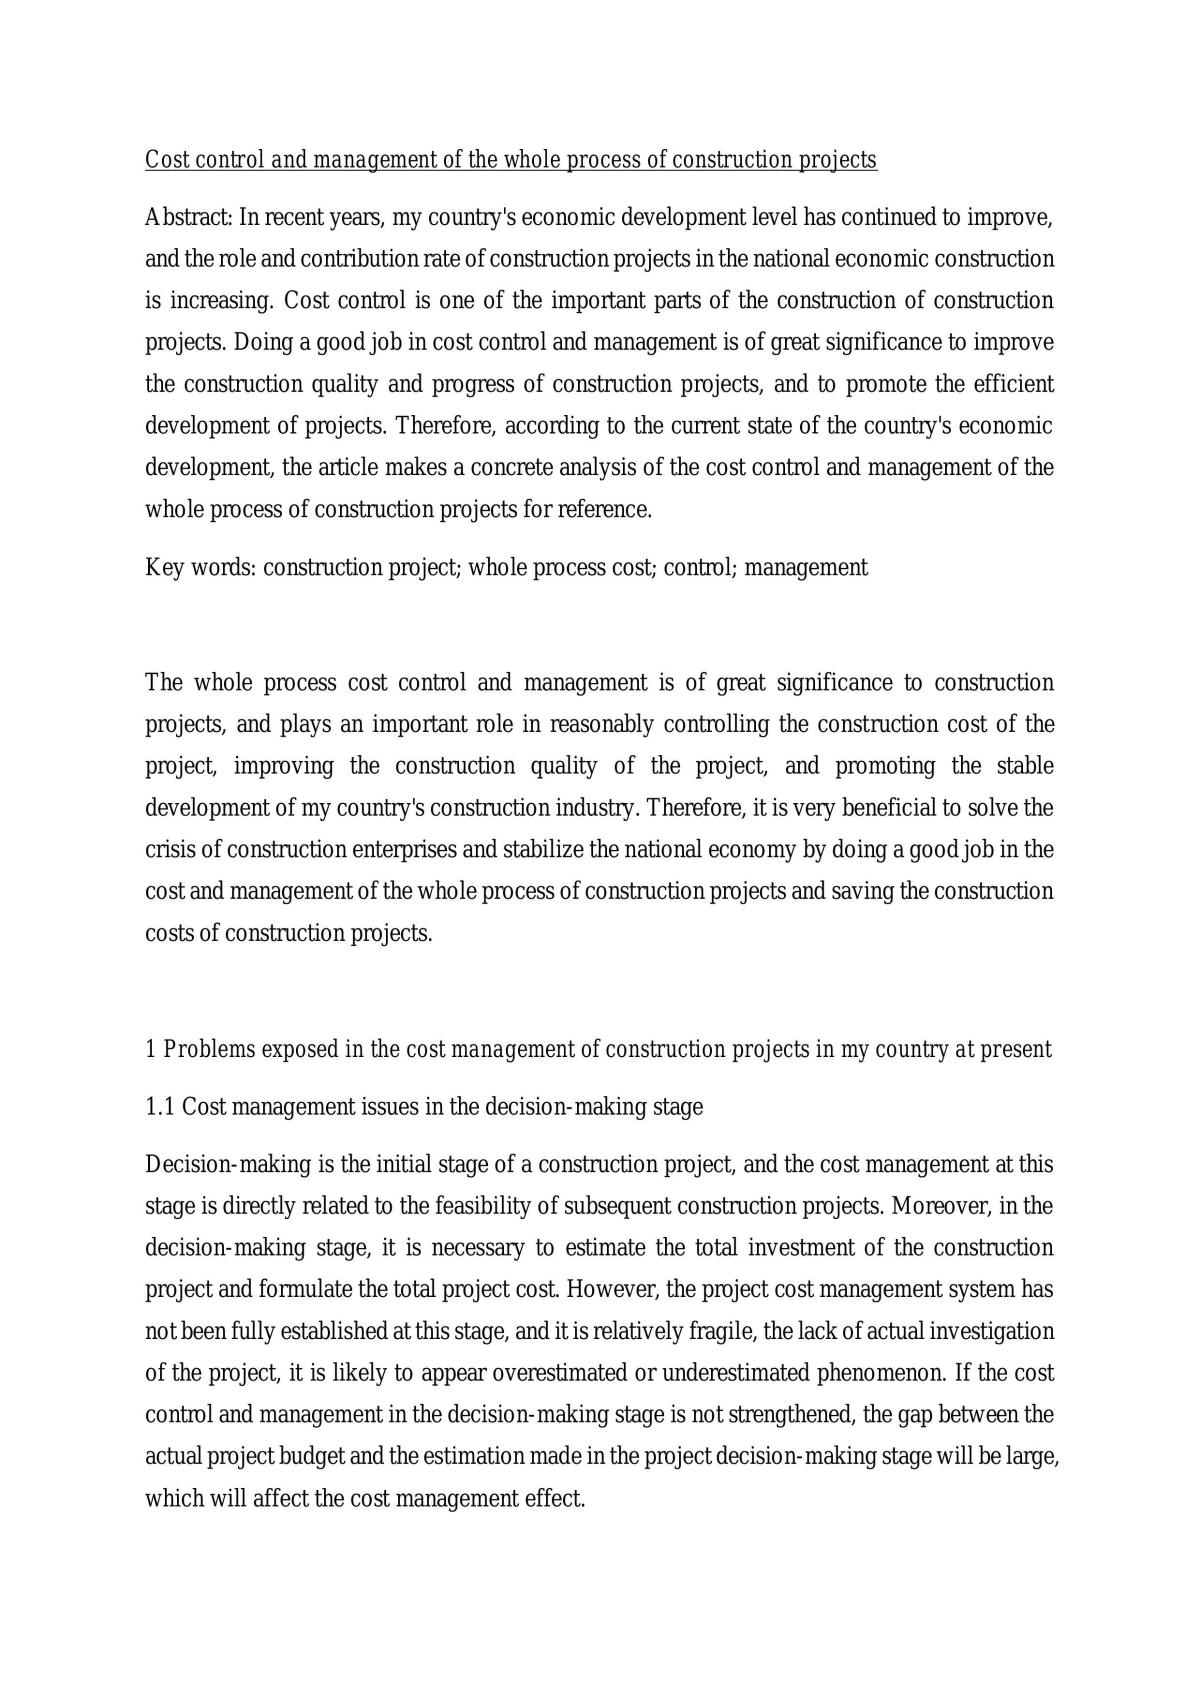 Cost control and management of the whole process of construction projects - Page 1